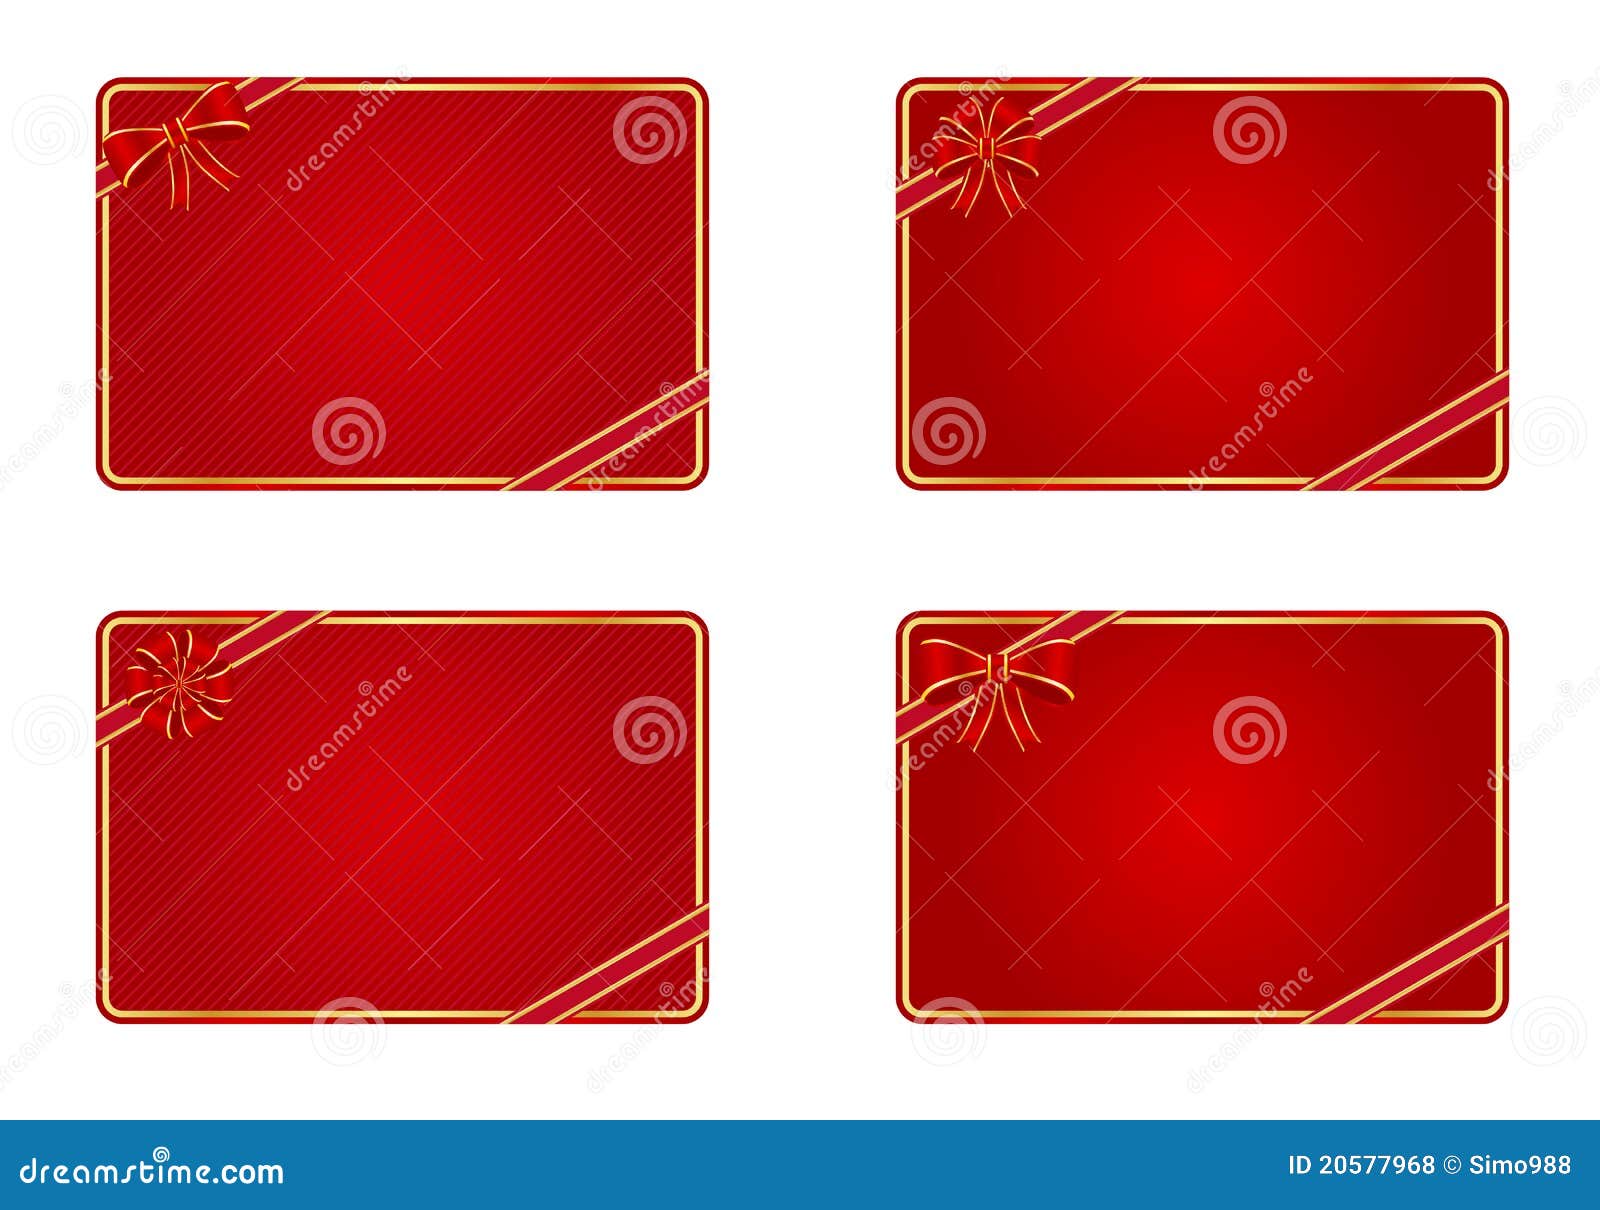 blank-gift-cards-royalty-free-stock-photos-image-20577968